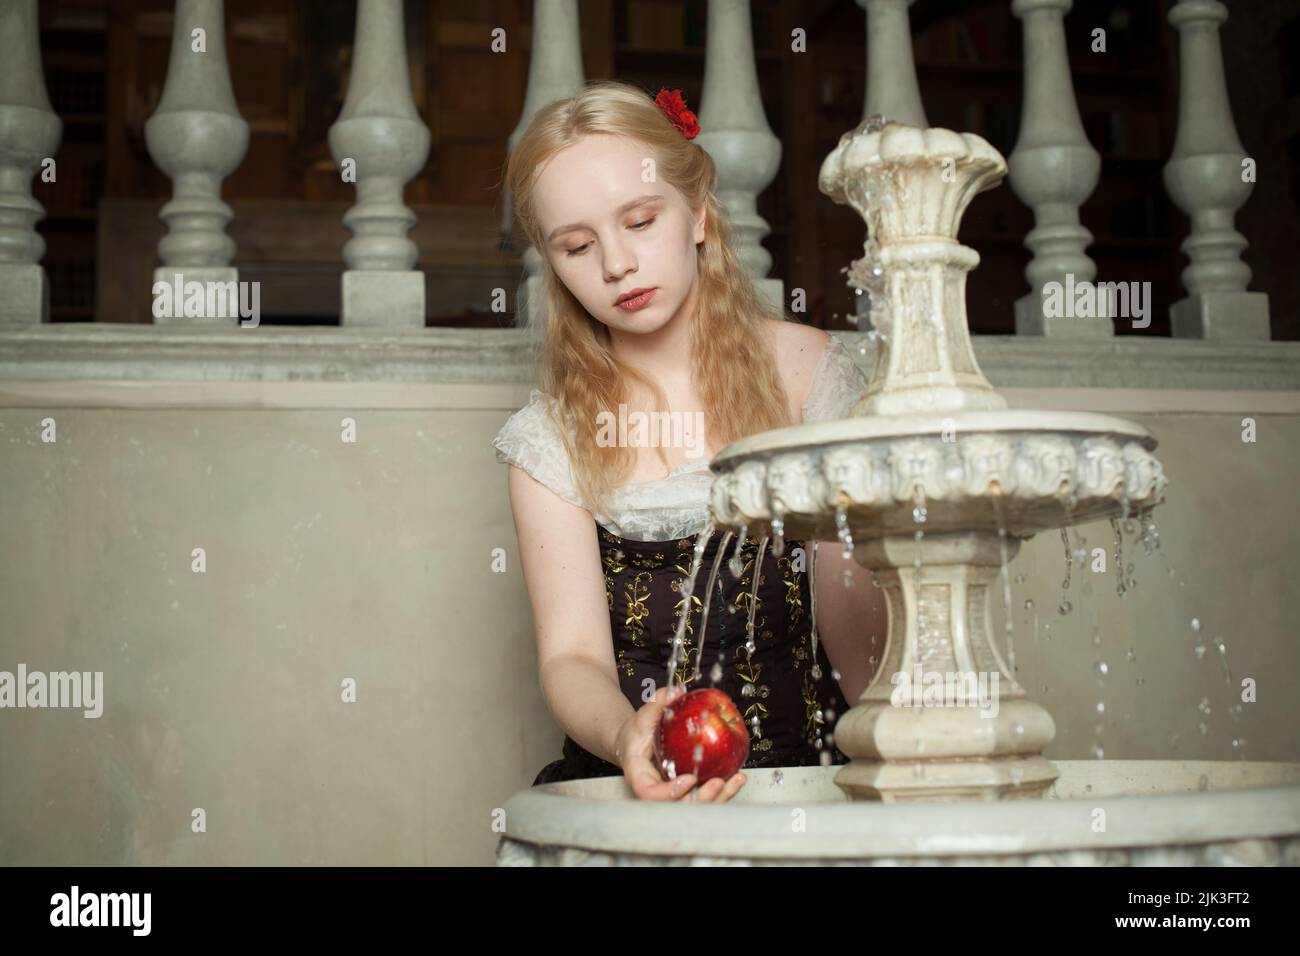 Young woman washing an apple in a vintage fountain Stock Photo